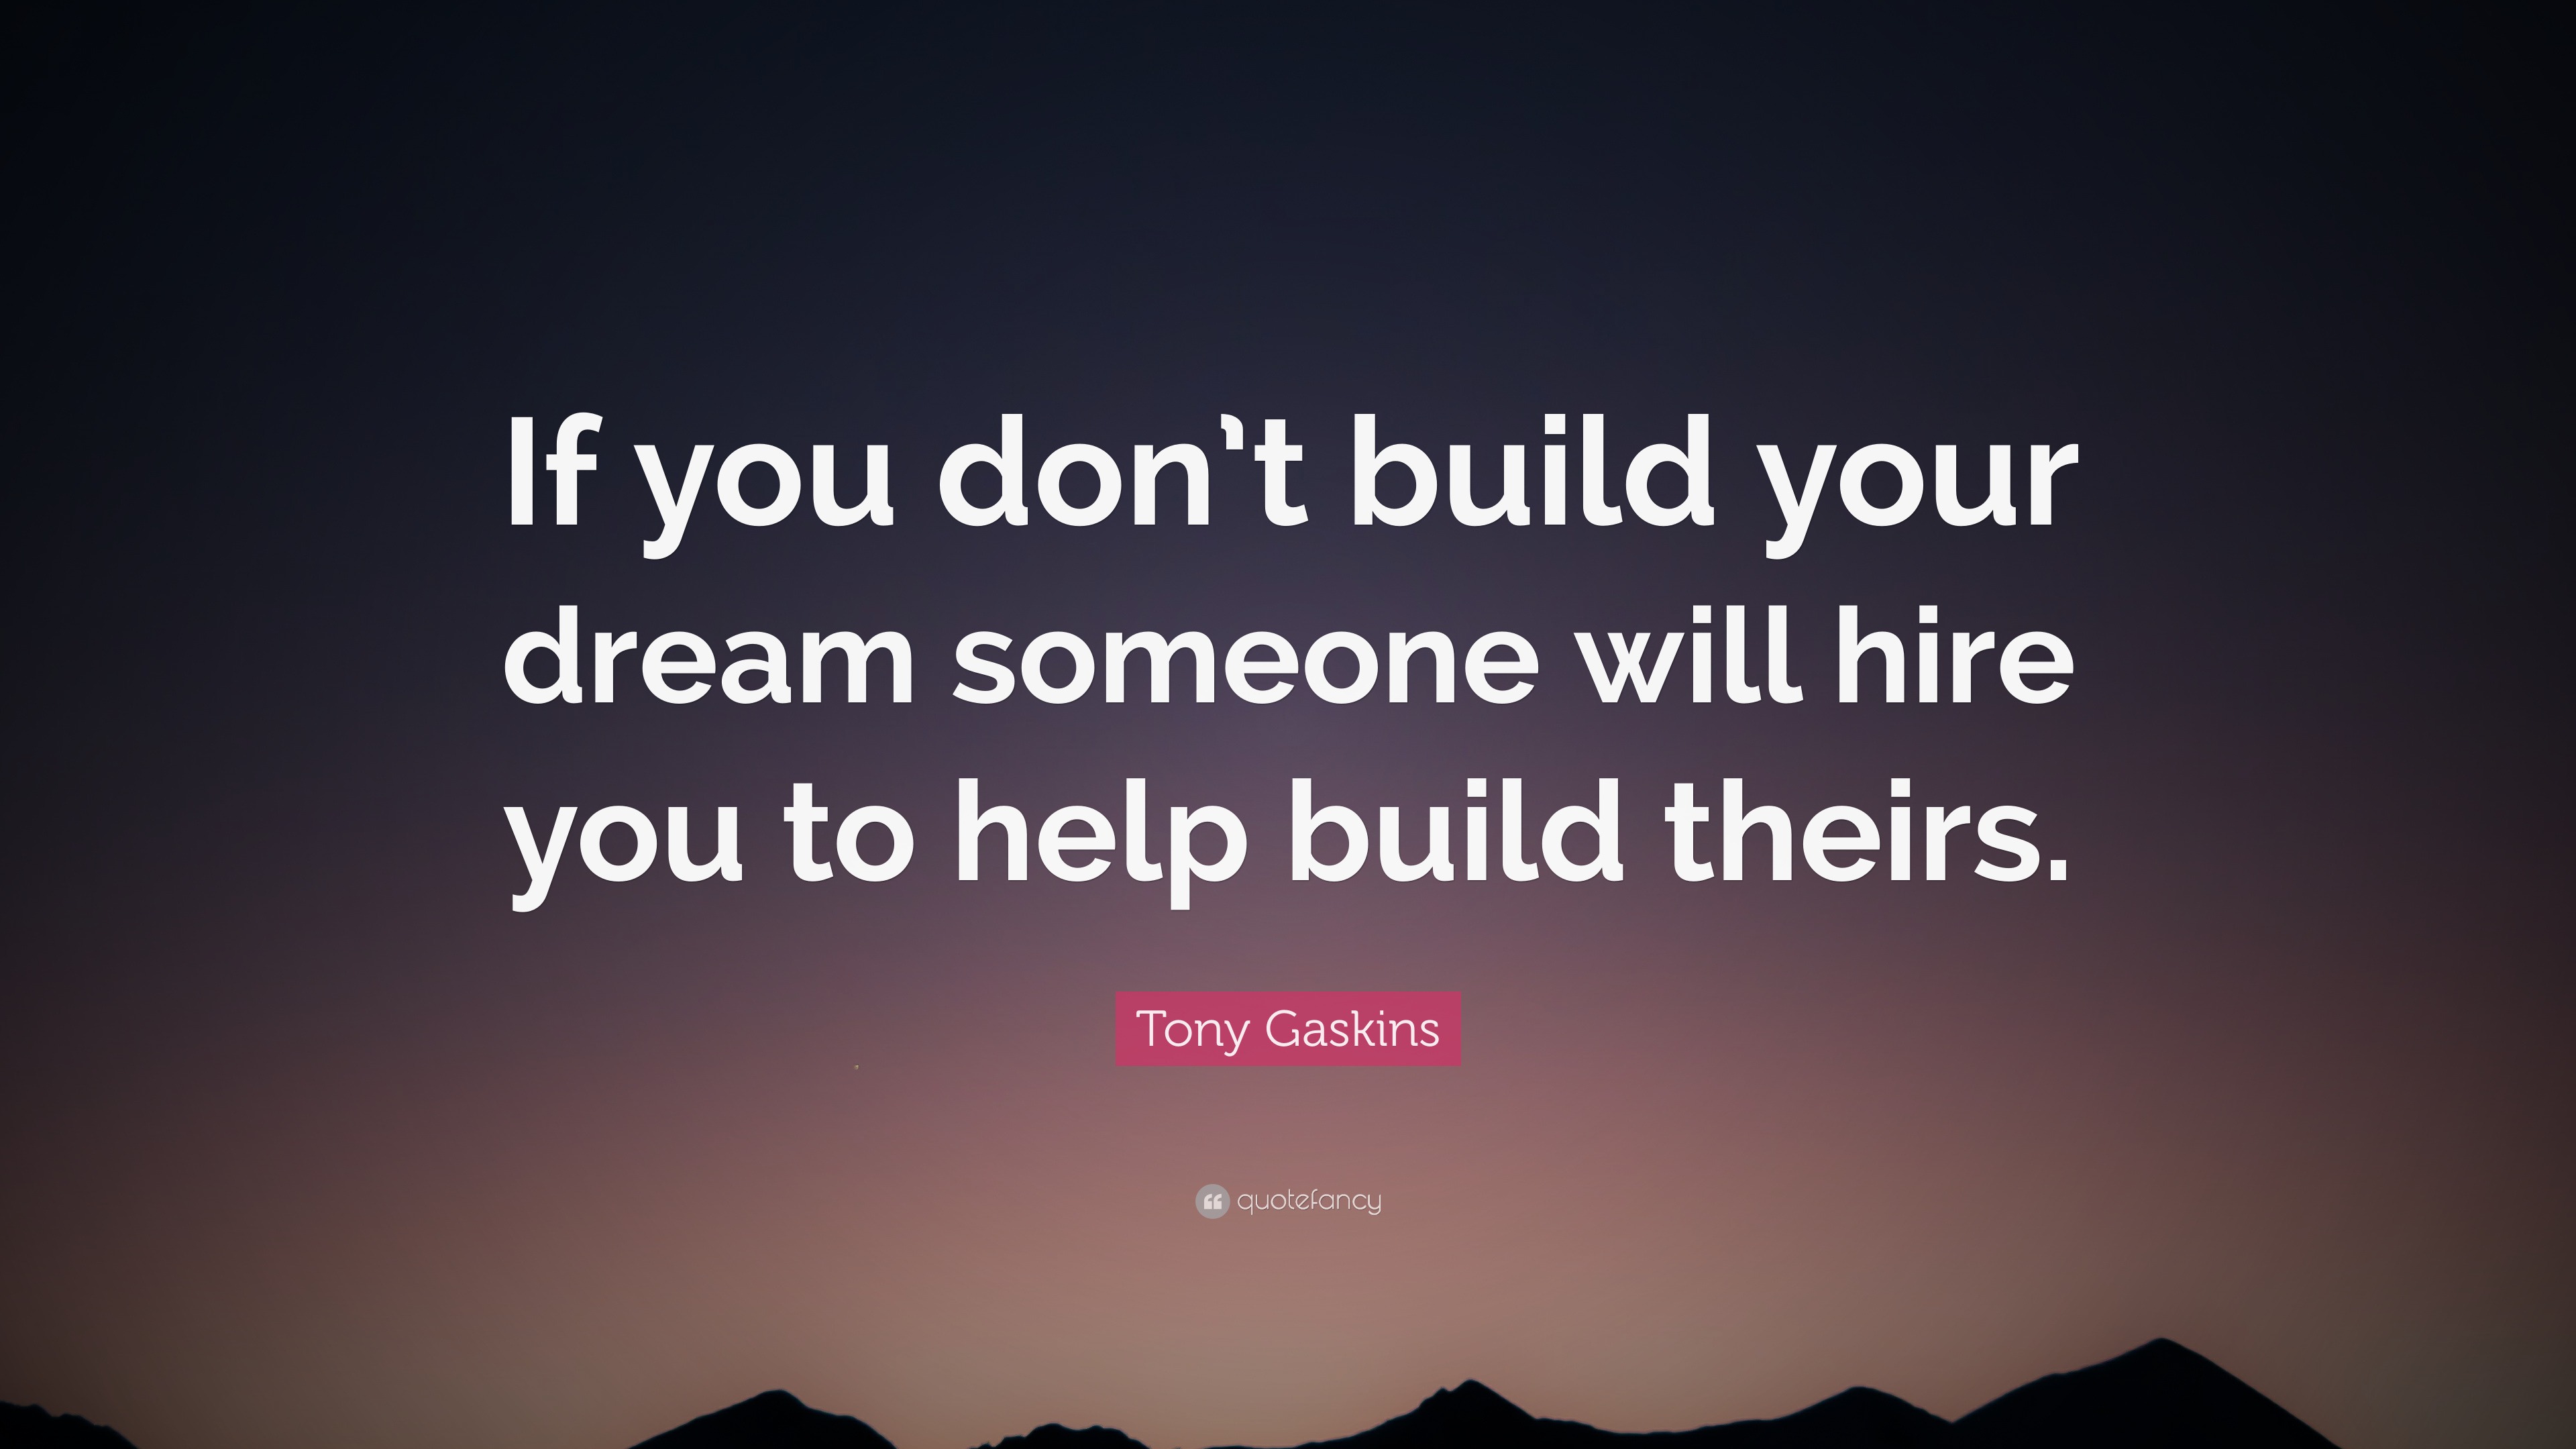 Tony Gaskins Quote If You Don T Build Your Dream Someone Will Hire You To Help